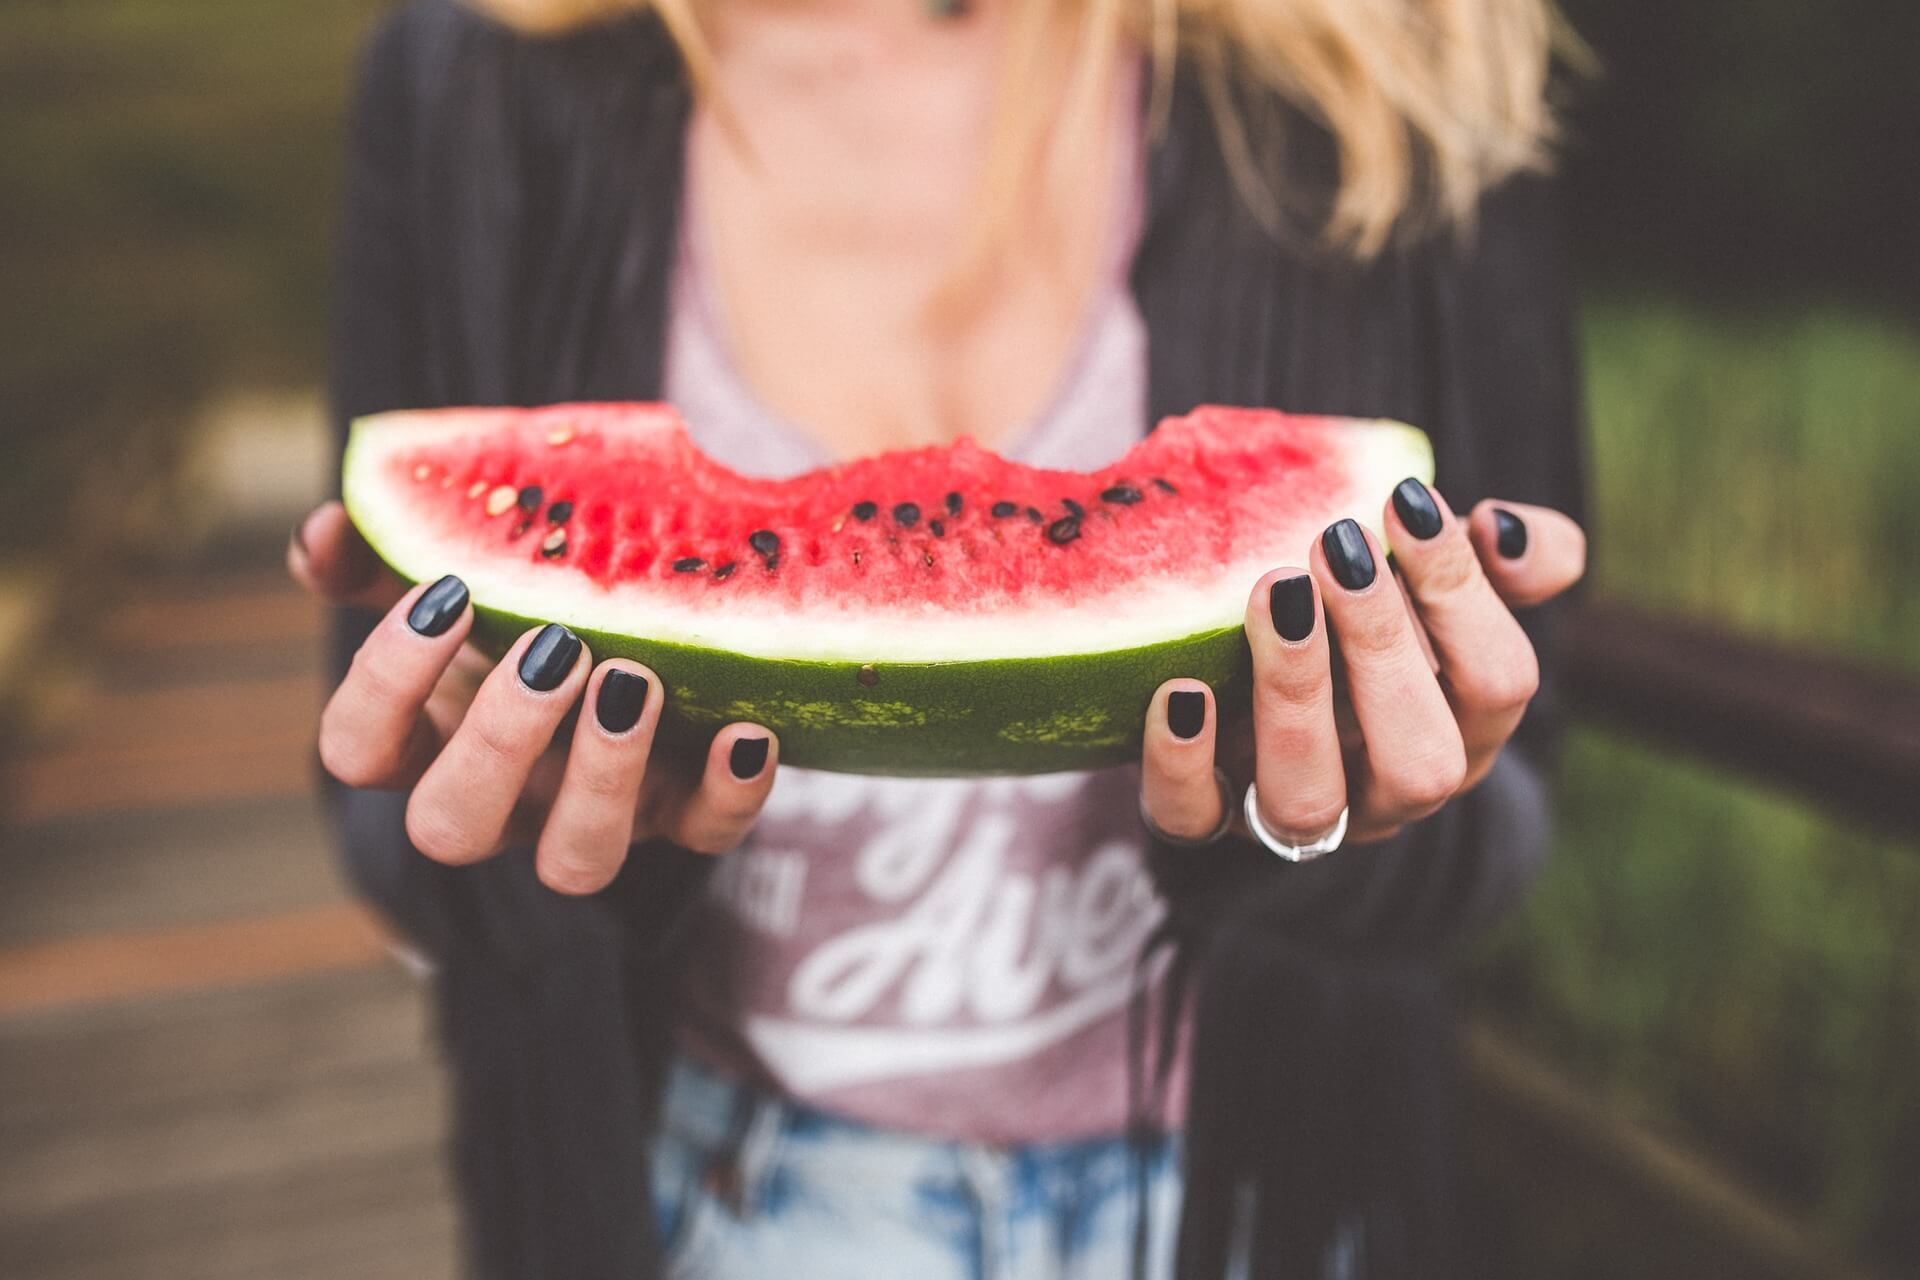 Young person eating a watermelon